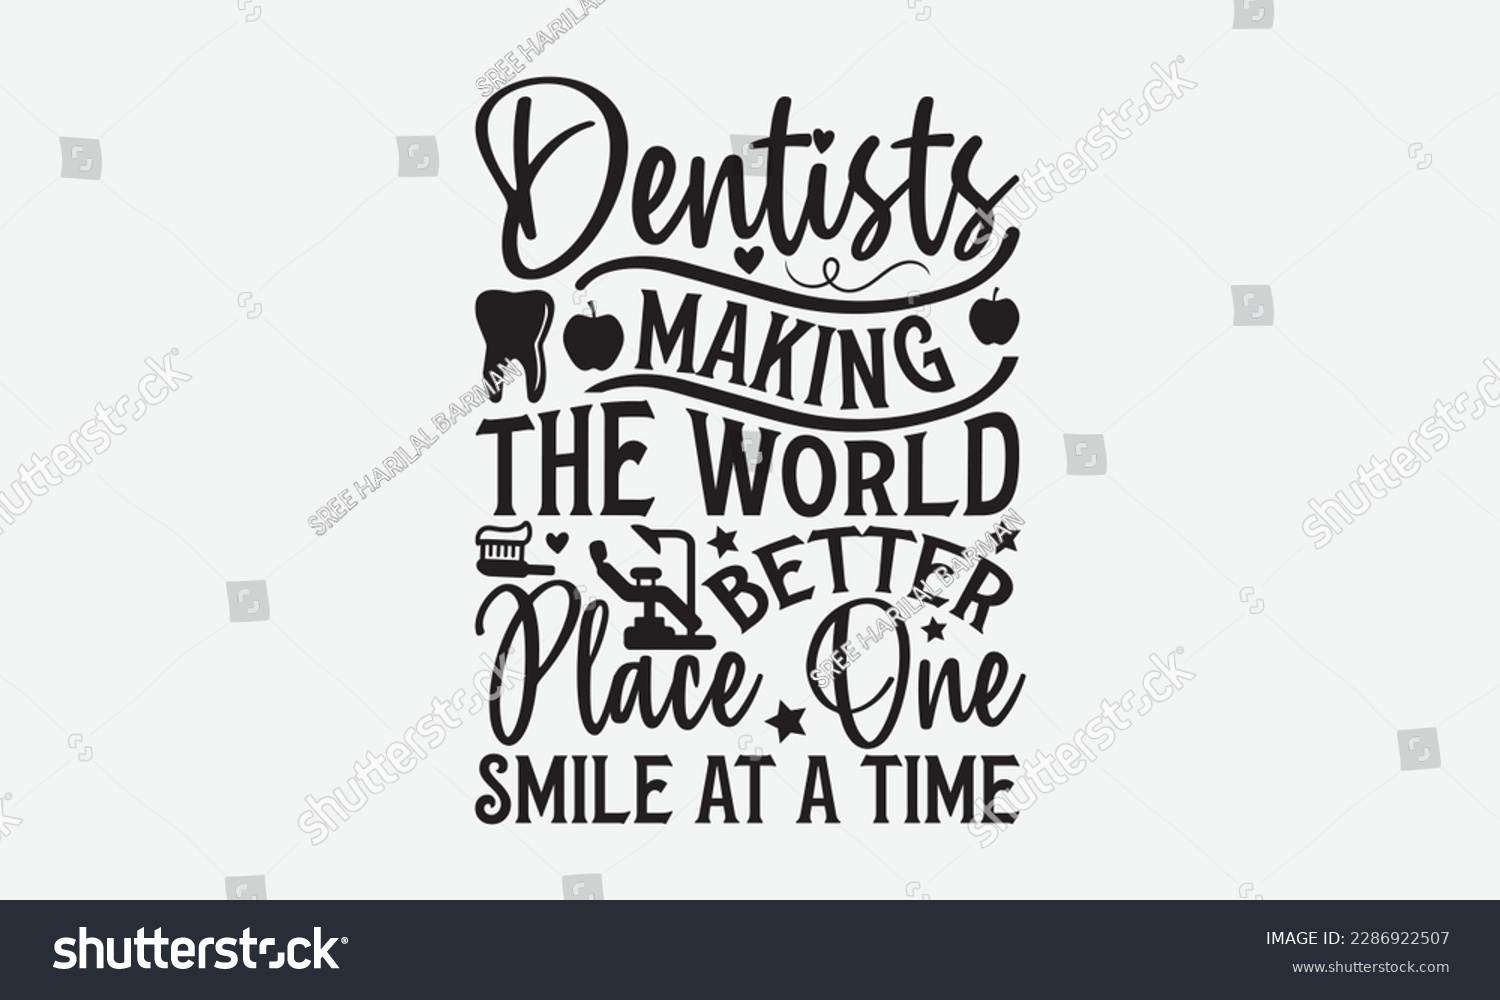 SVG of Dentists Making The World Better Place One Smile At A Time - Dentist T-shirt Design, Conceptual handwritten phrase craft SVG hand-lettered, Handmade calligraphy vector illustration, template, greeting svg